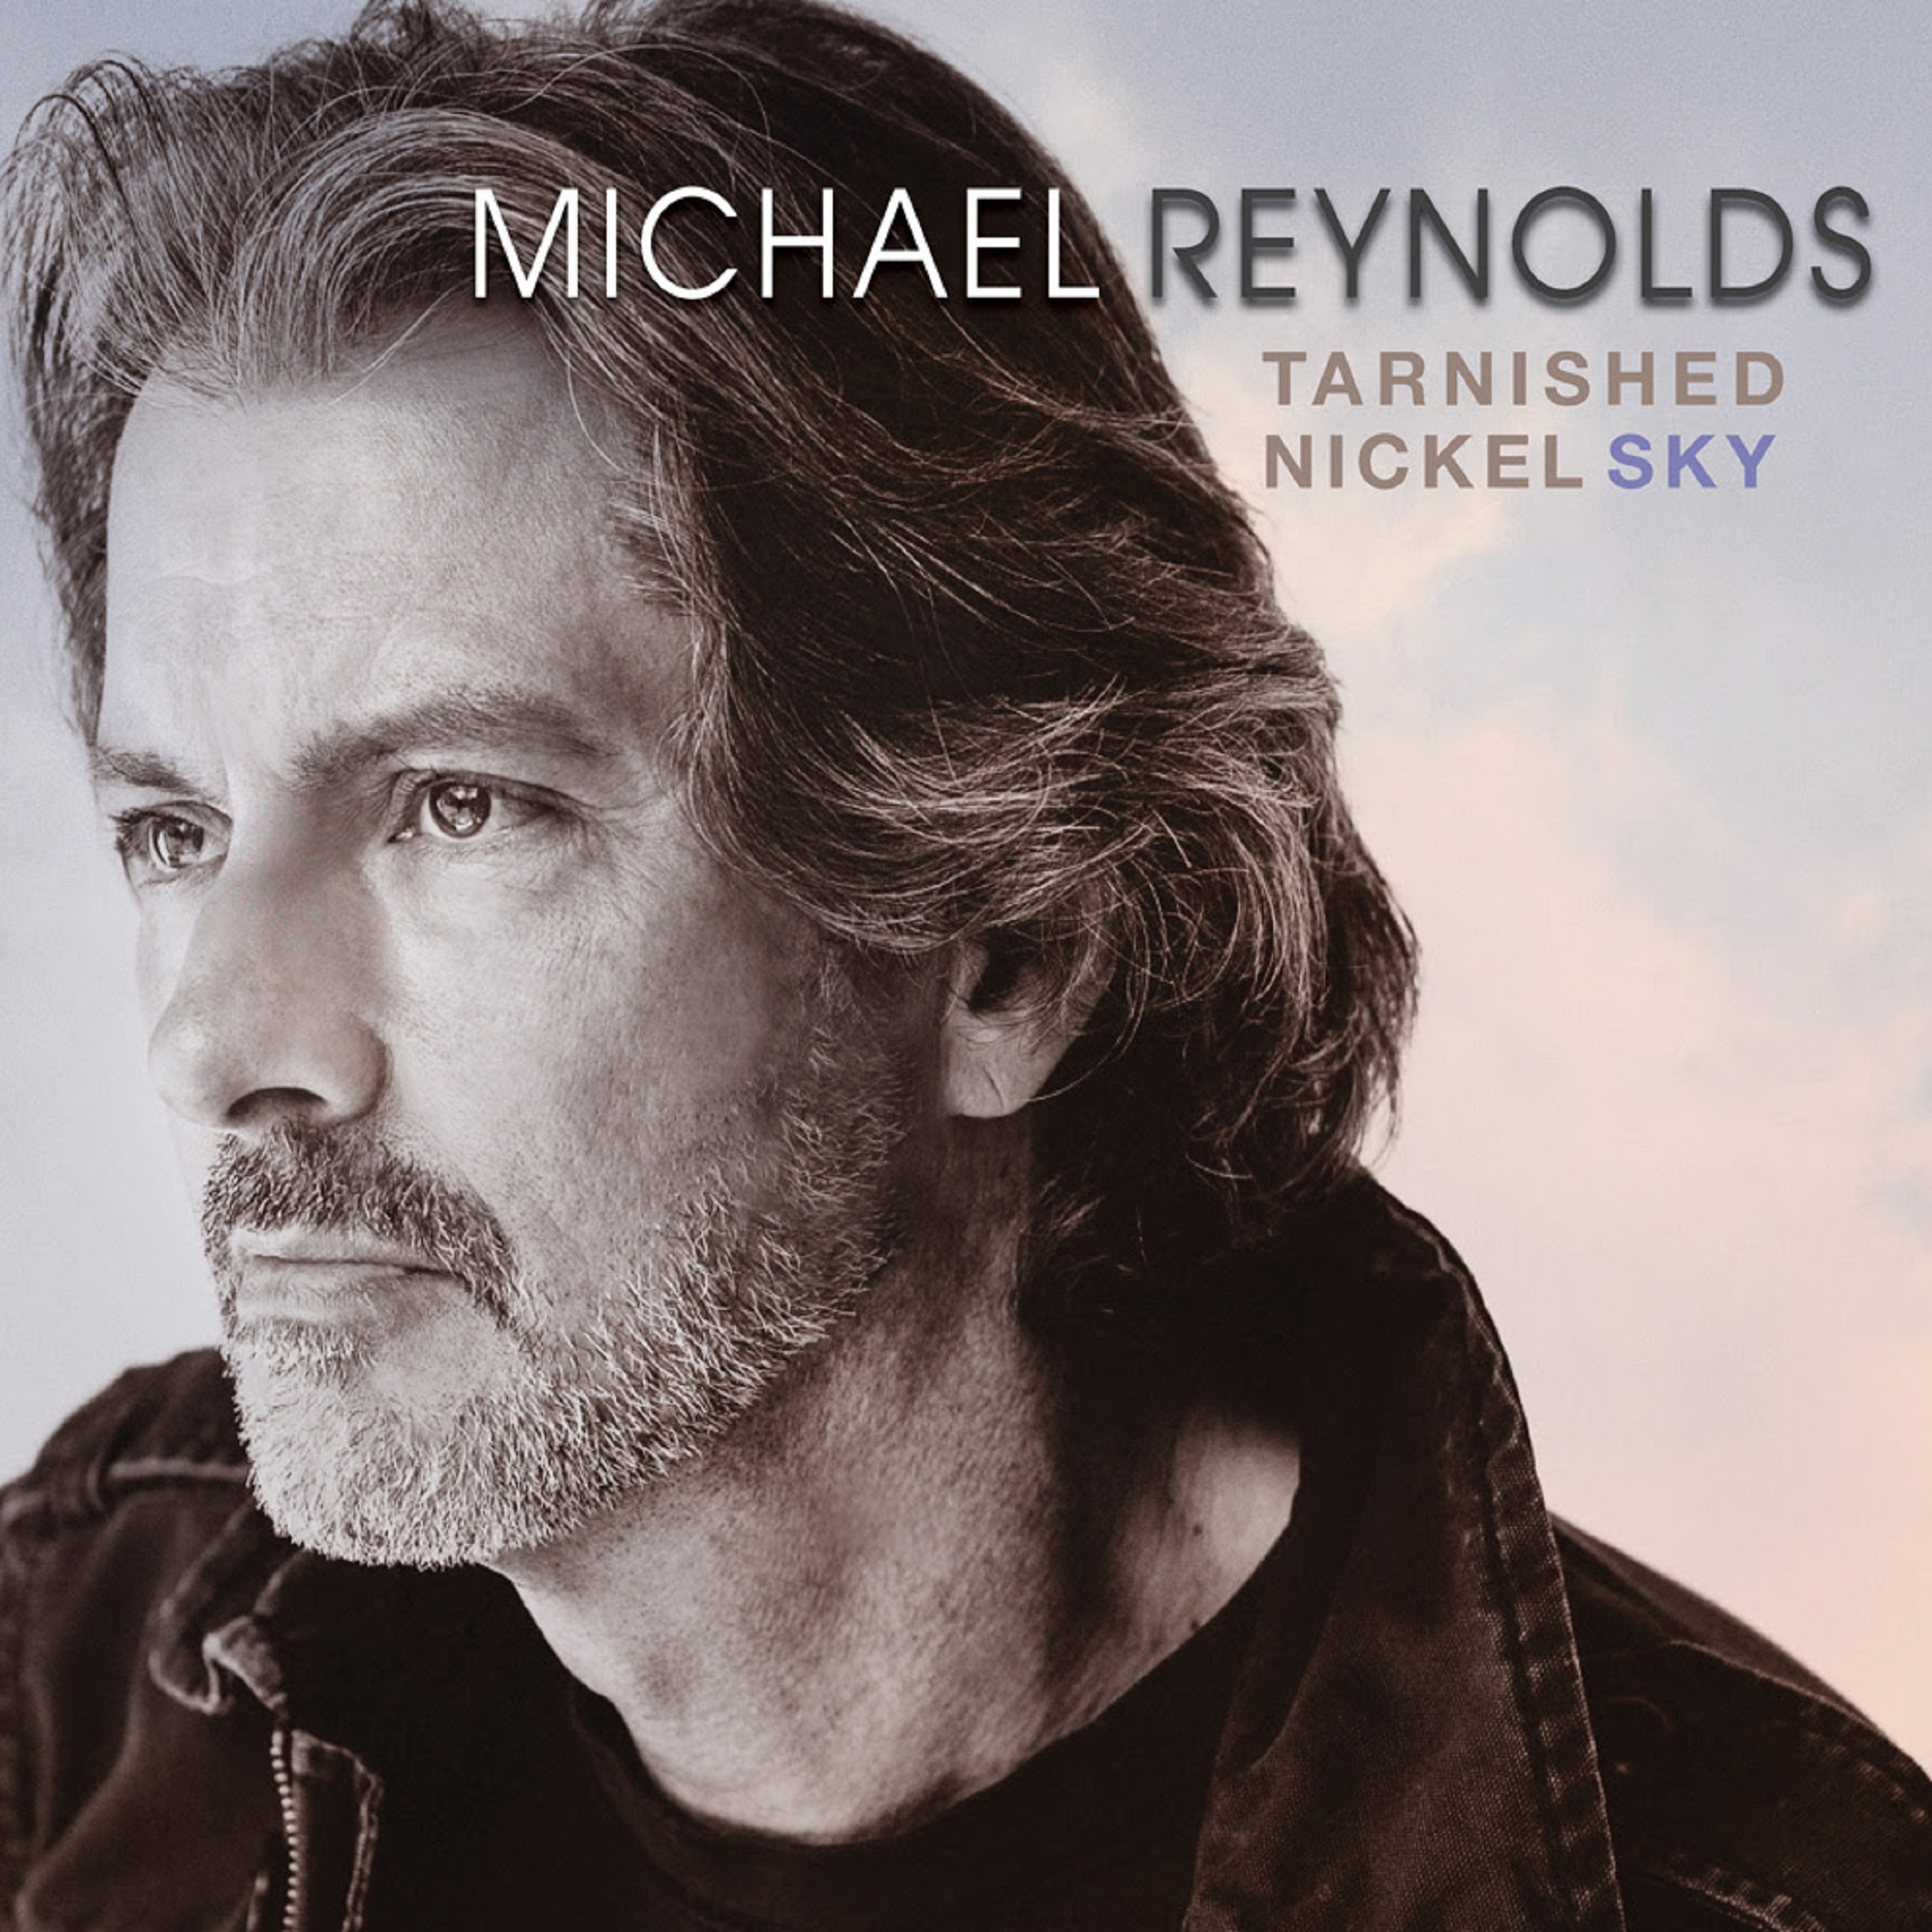 MICHAEL REYNOLDS RETURNS AFTER TEN YEARS WITH THE 'TARNISHED NICKEL SKY'